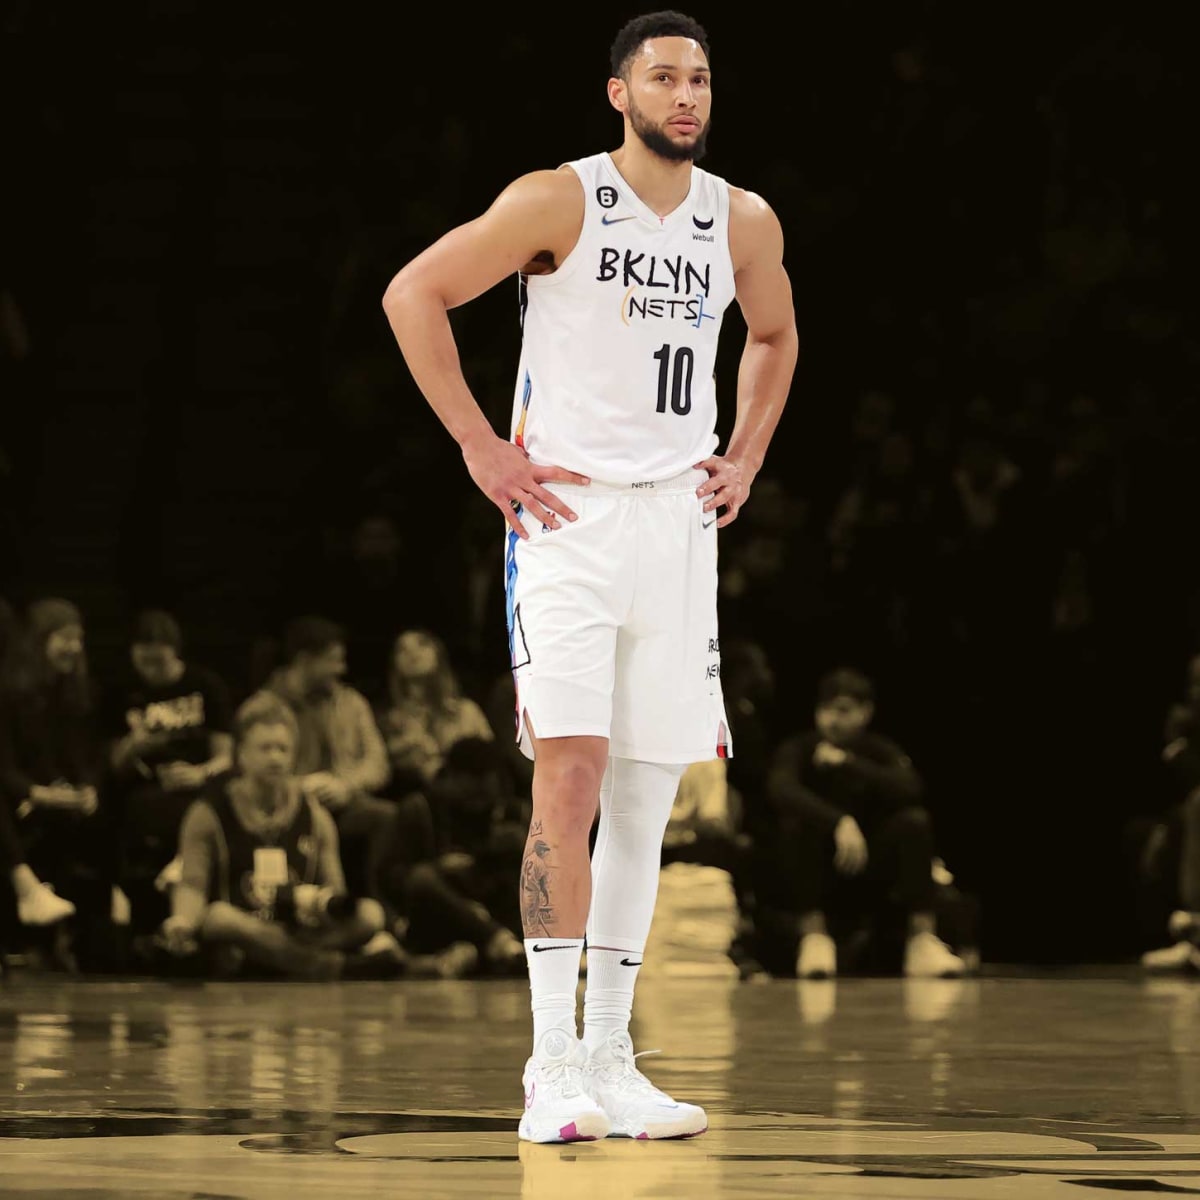 Brian Windhorst and Zach Lowe think the Nets' biggest problem is